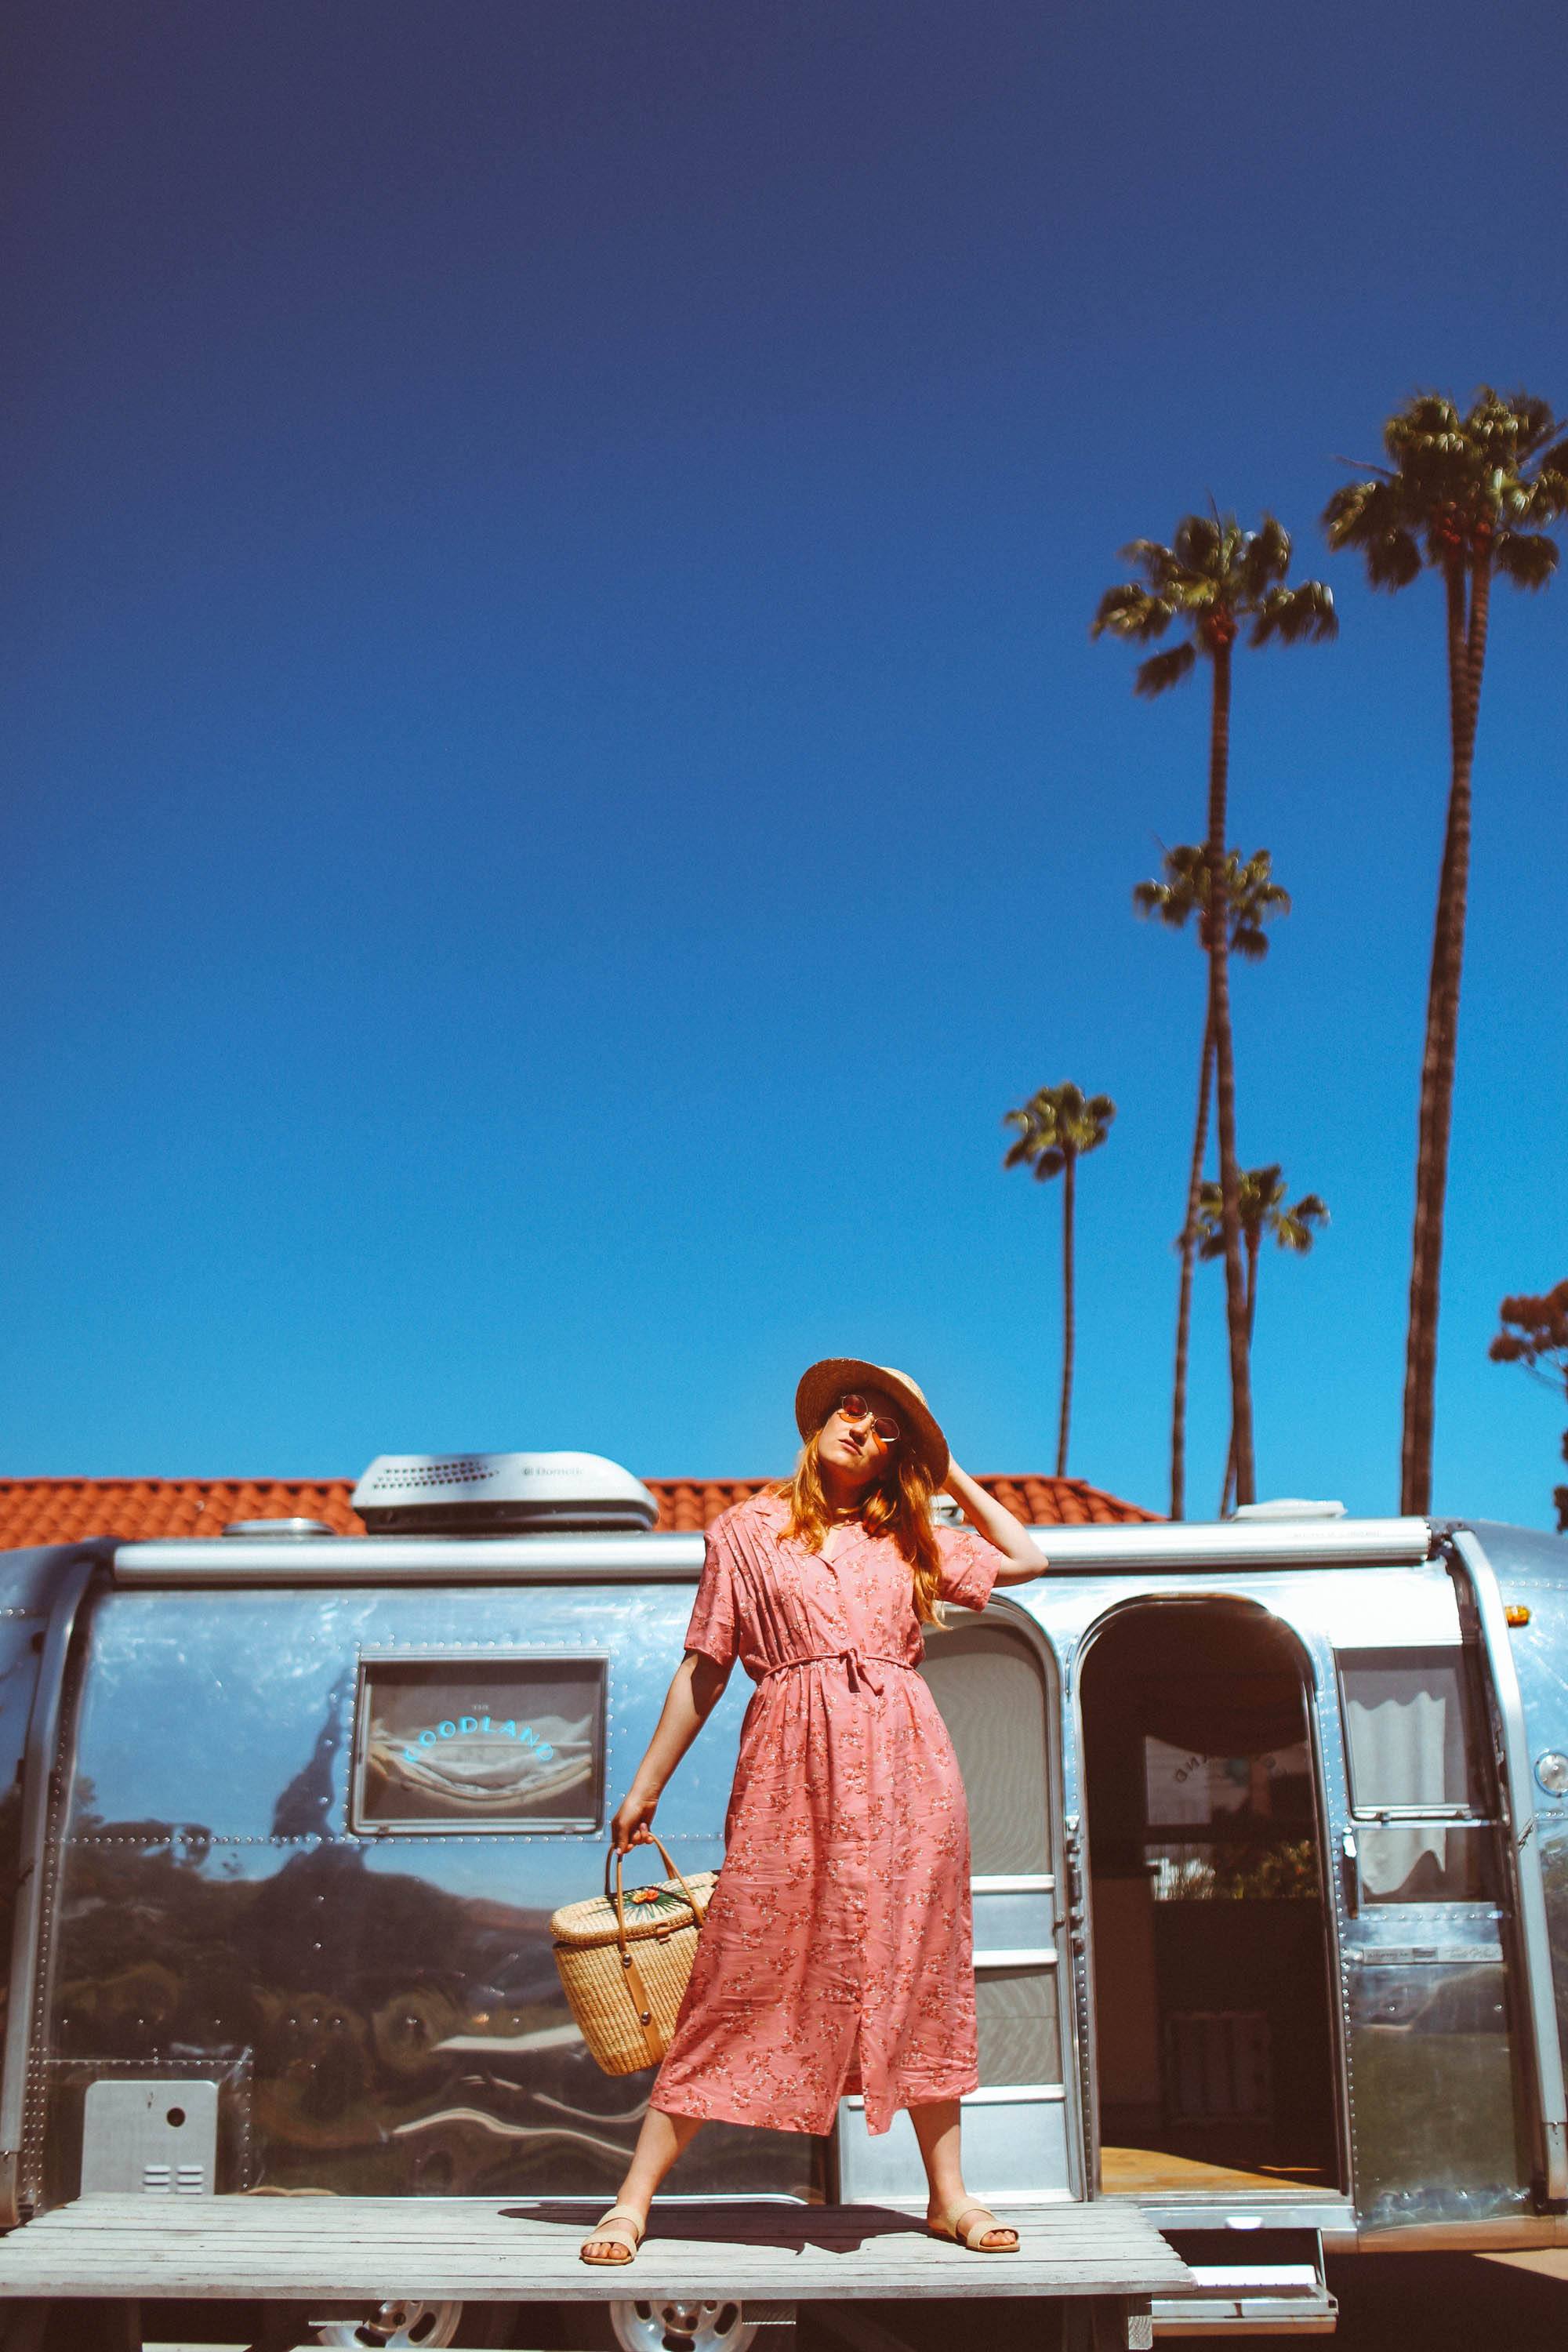 Woman in hat and vintage pink dress and hat standing on a table in front of an airstream with palm trees in the background